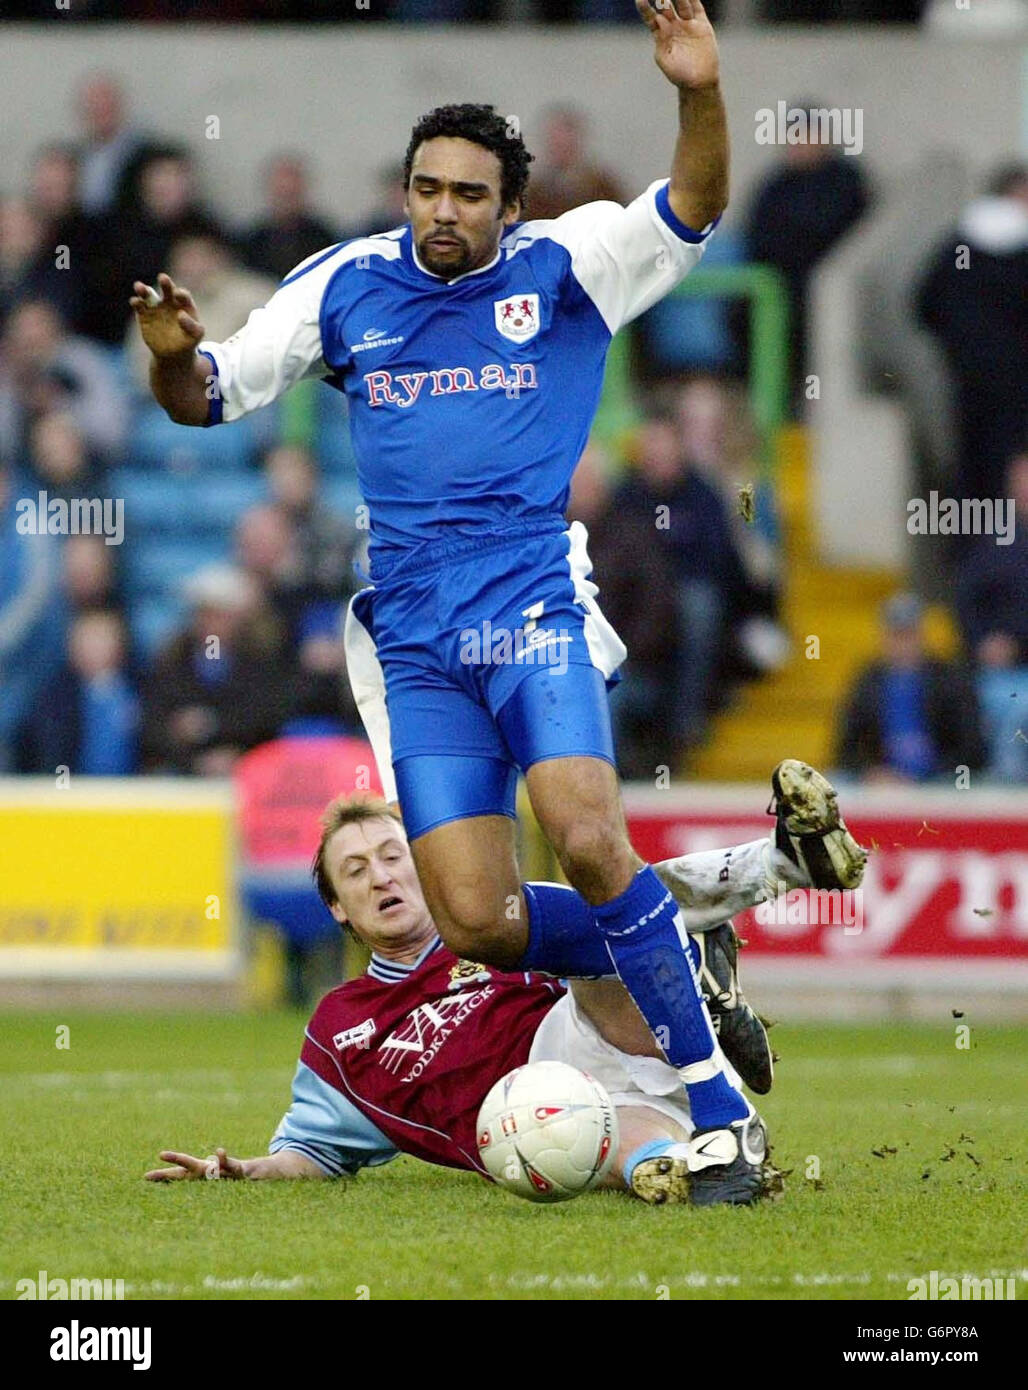 Burnley's Tony Grant (left) slides in behind Paul Ifill of Millwall, during the FA Cup 5th round match at The New Den, Millwall. Final score: Millwall 1, Burnley nil. . Stock Photo